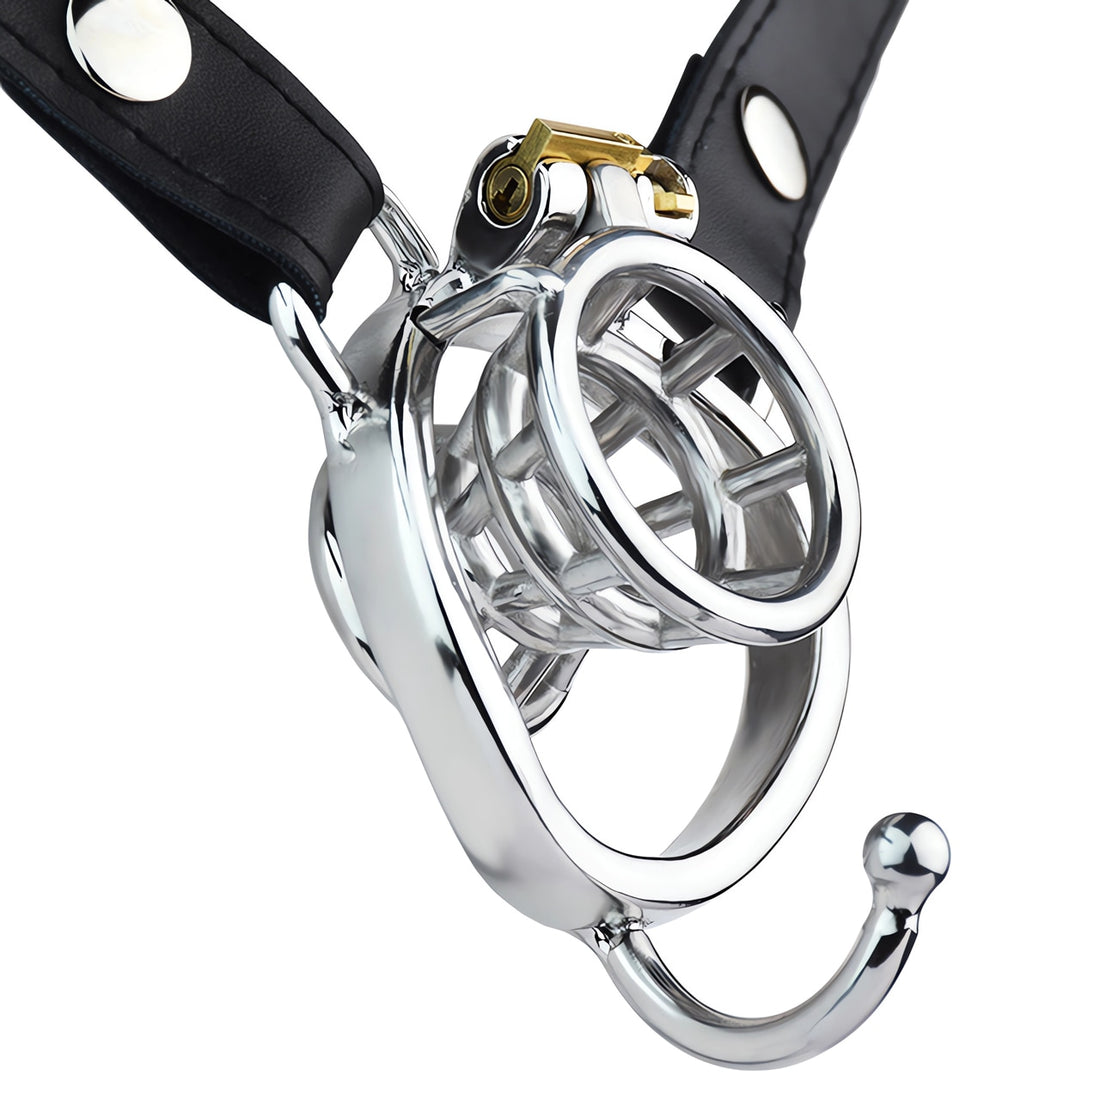 Metal chastity device with leather straps for ultimate comfort and security